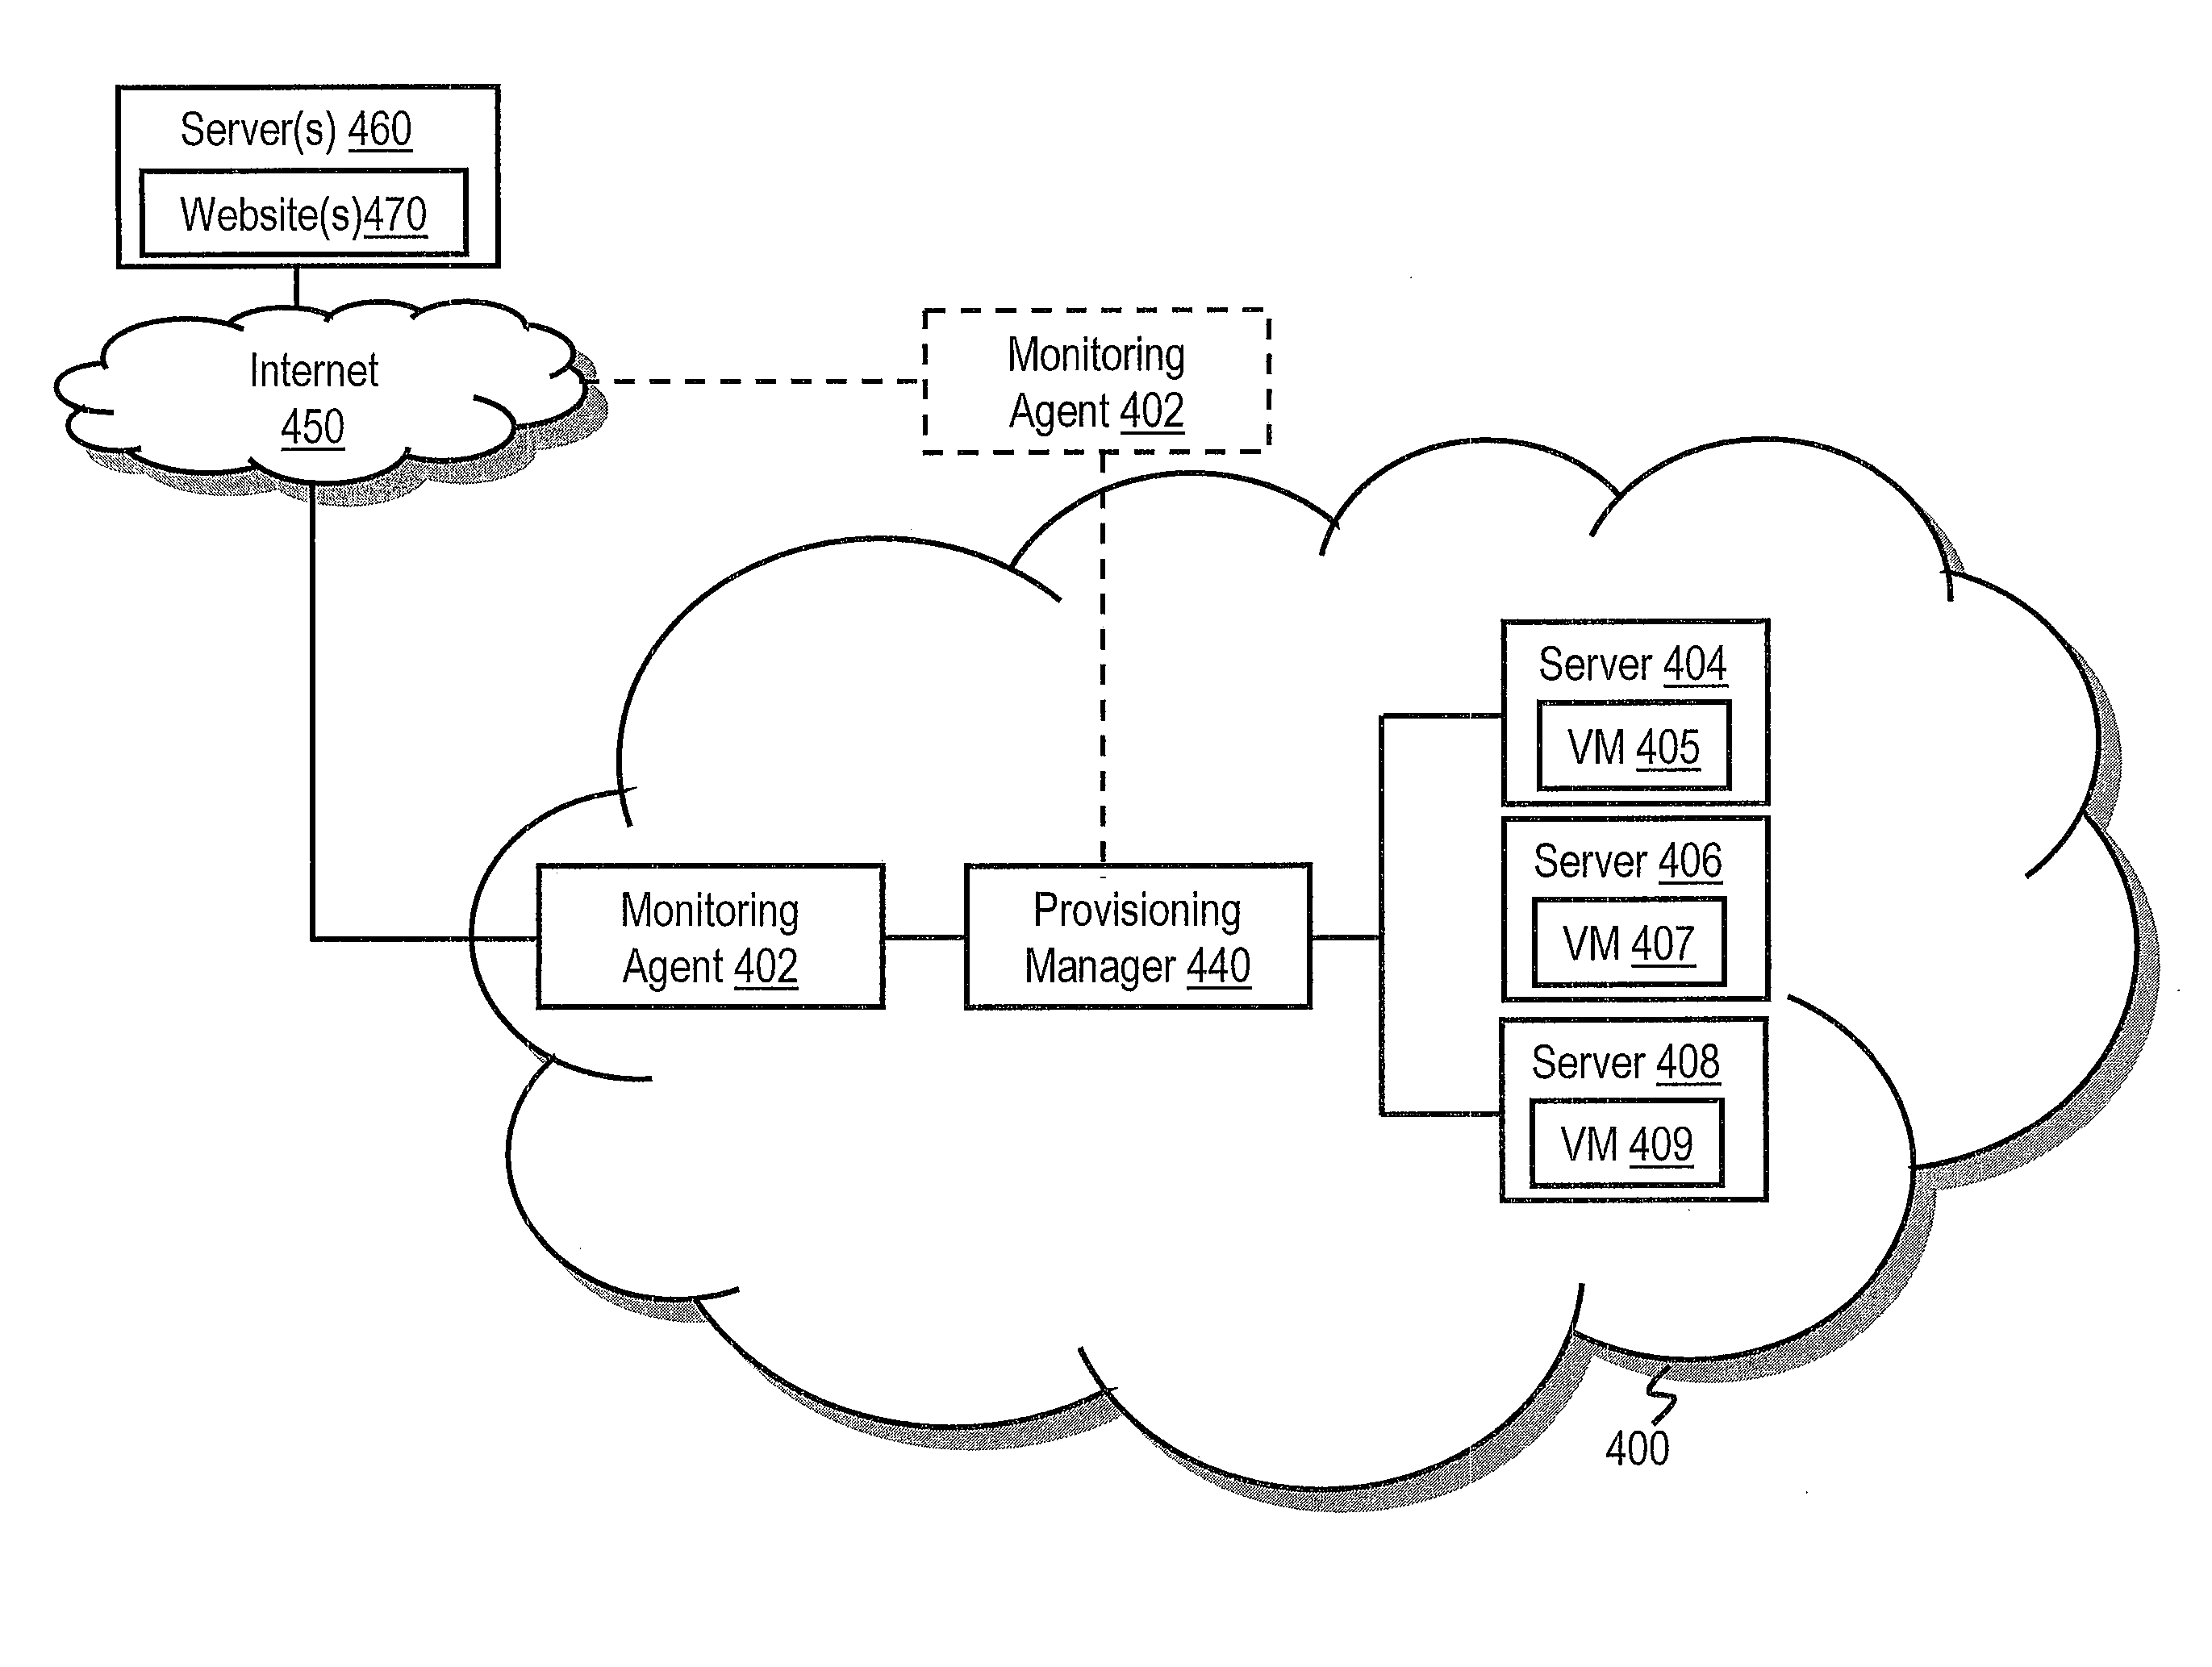 Techniques for provisioning cloud computing environment resources based on social media analysis